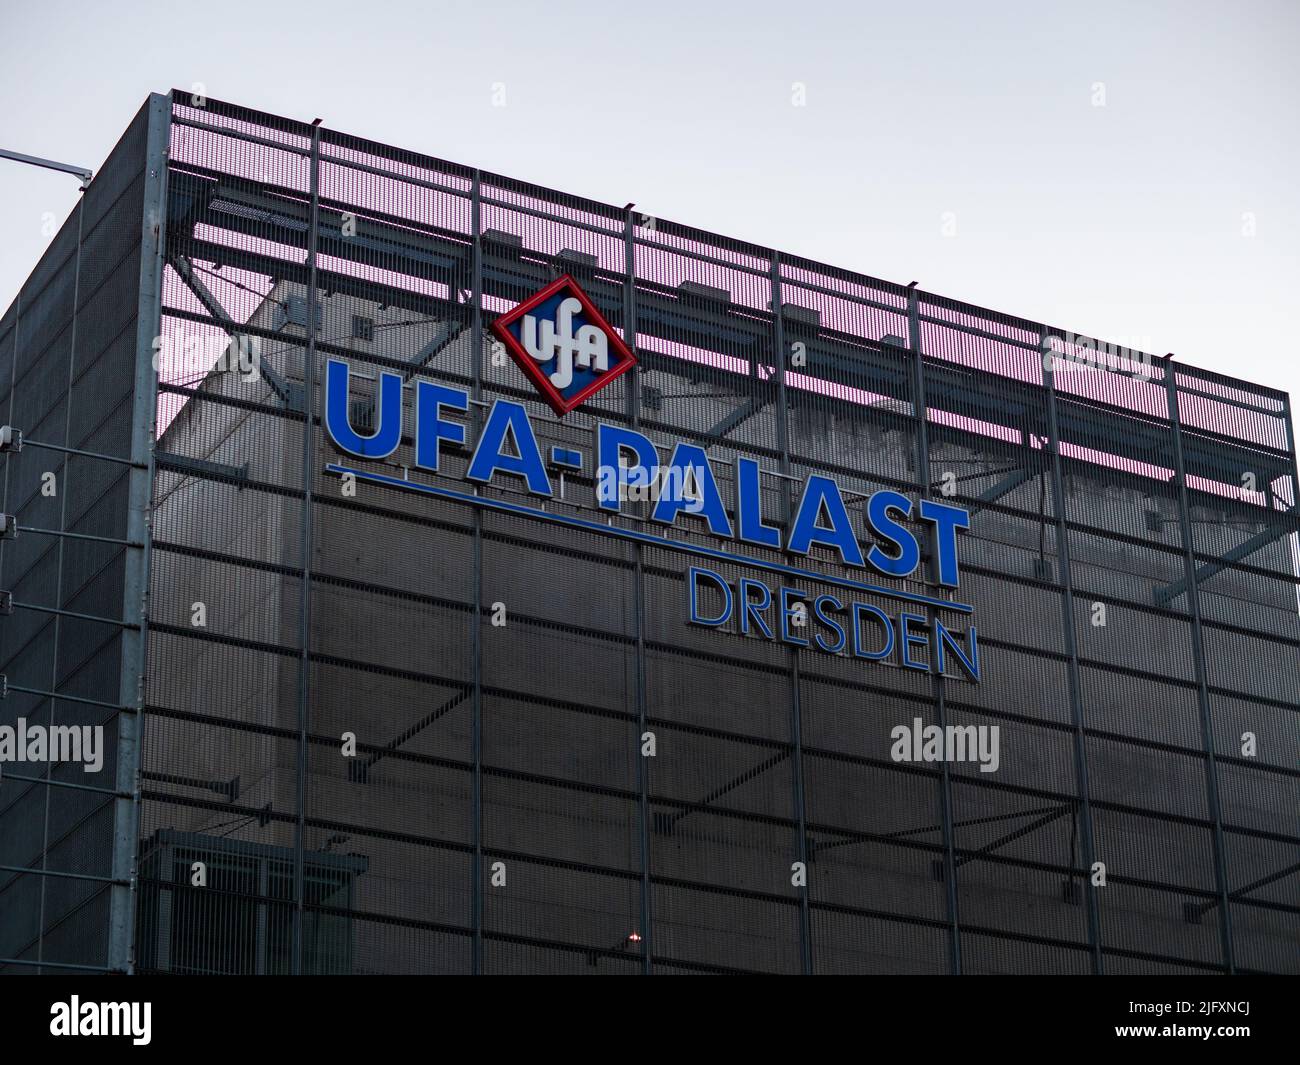 UFA Palast Dresden logo on the exterior wall of the building. One of the movie theaters in the city. Facade of a cinema in modern architecture. Stock Photo